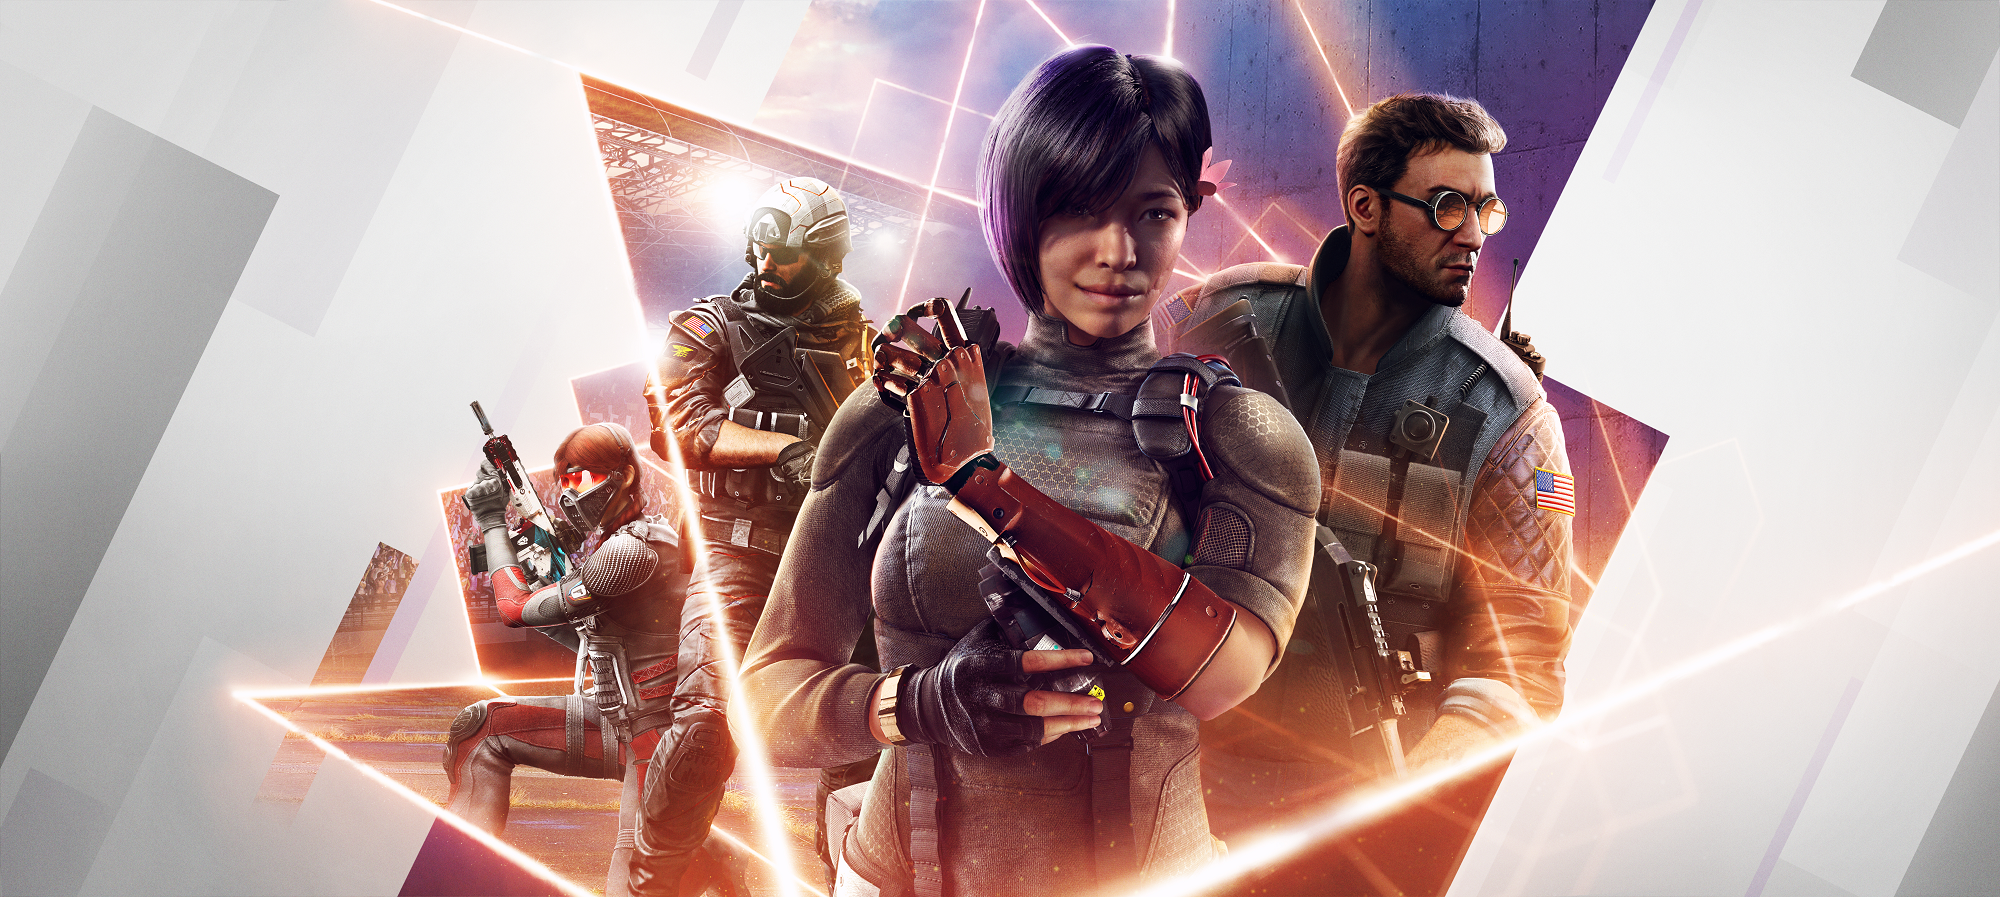 Tom Clancy’s Rainbow Six® Siege Reveals the Second Season of Year 6: North Star